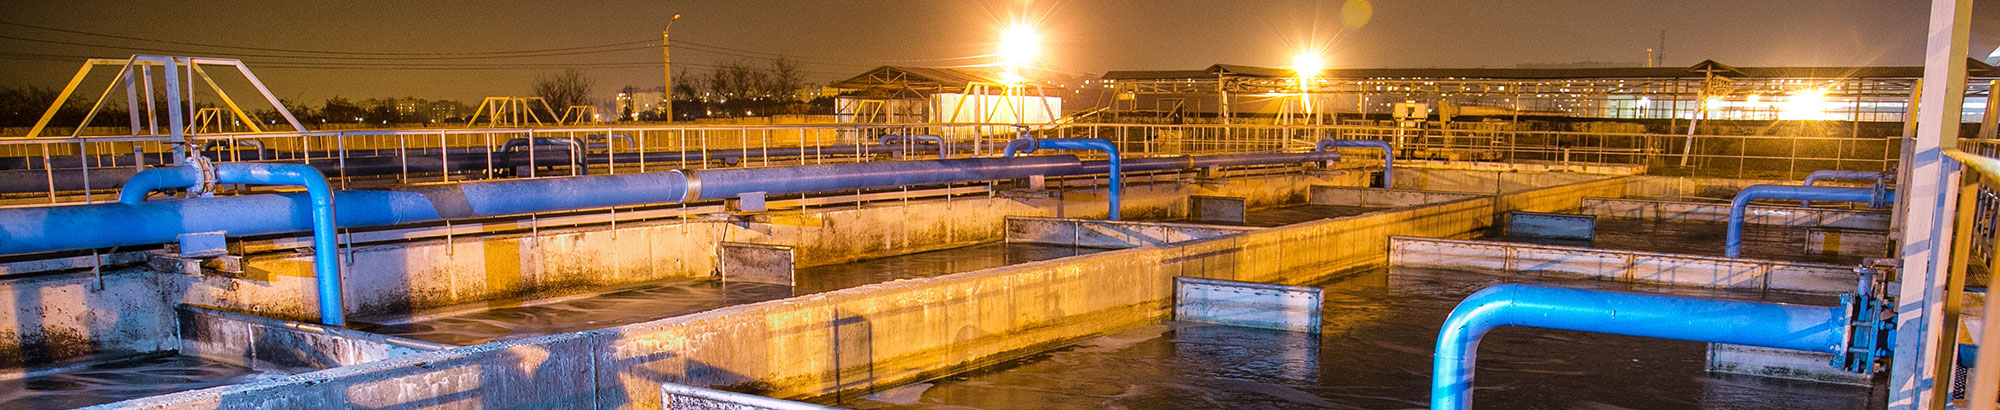 Waste Water At Night banner